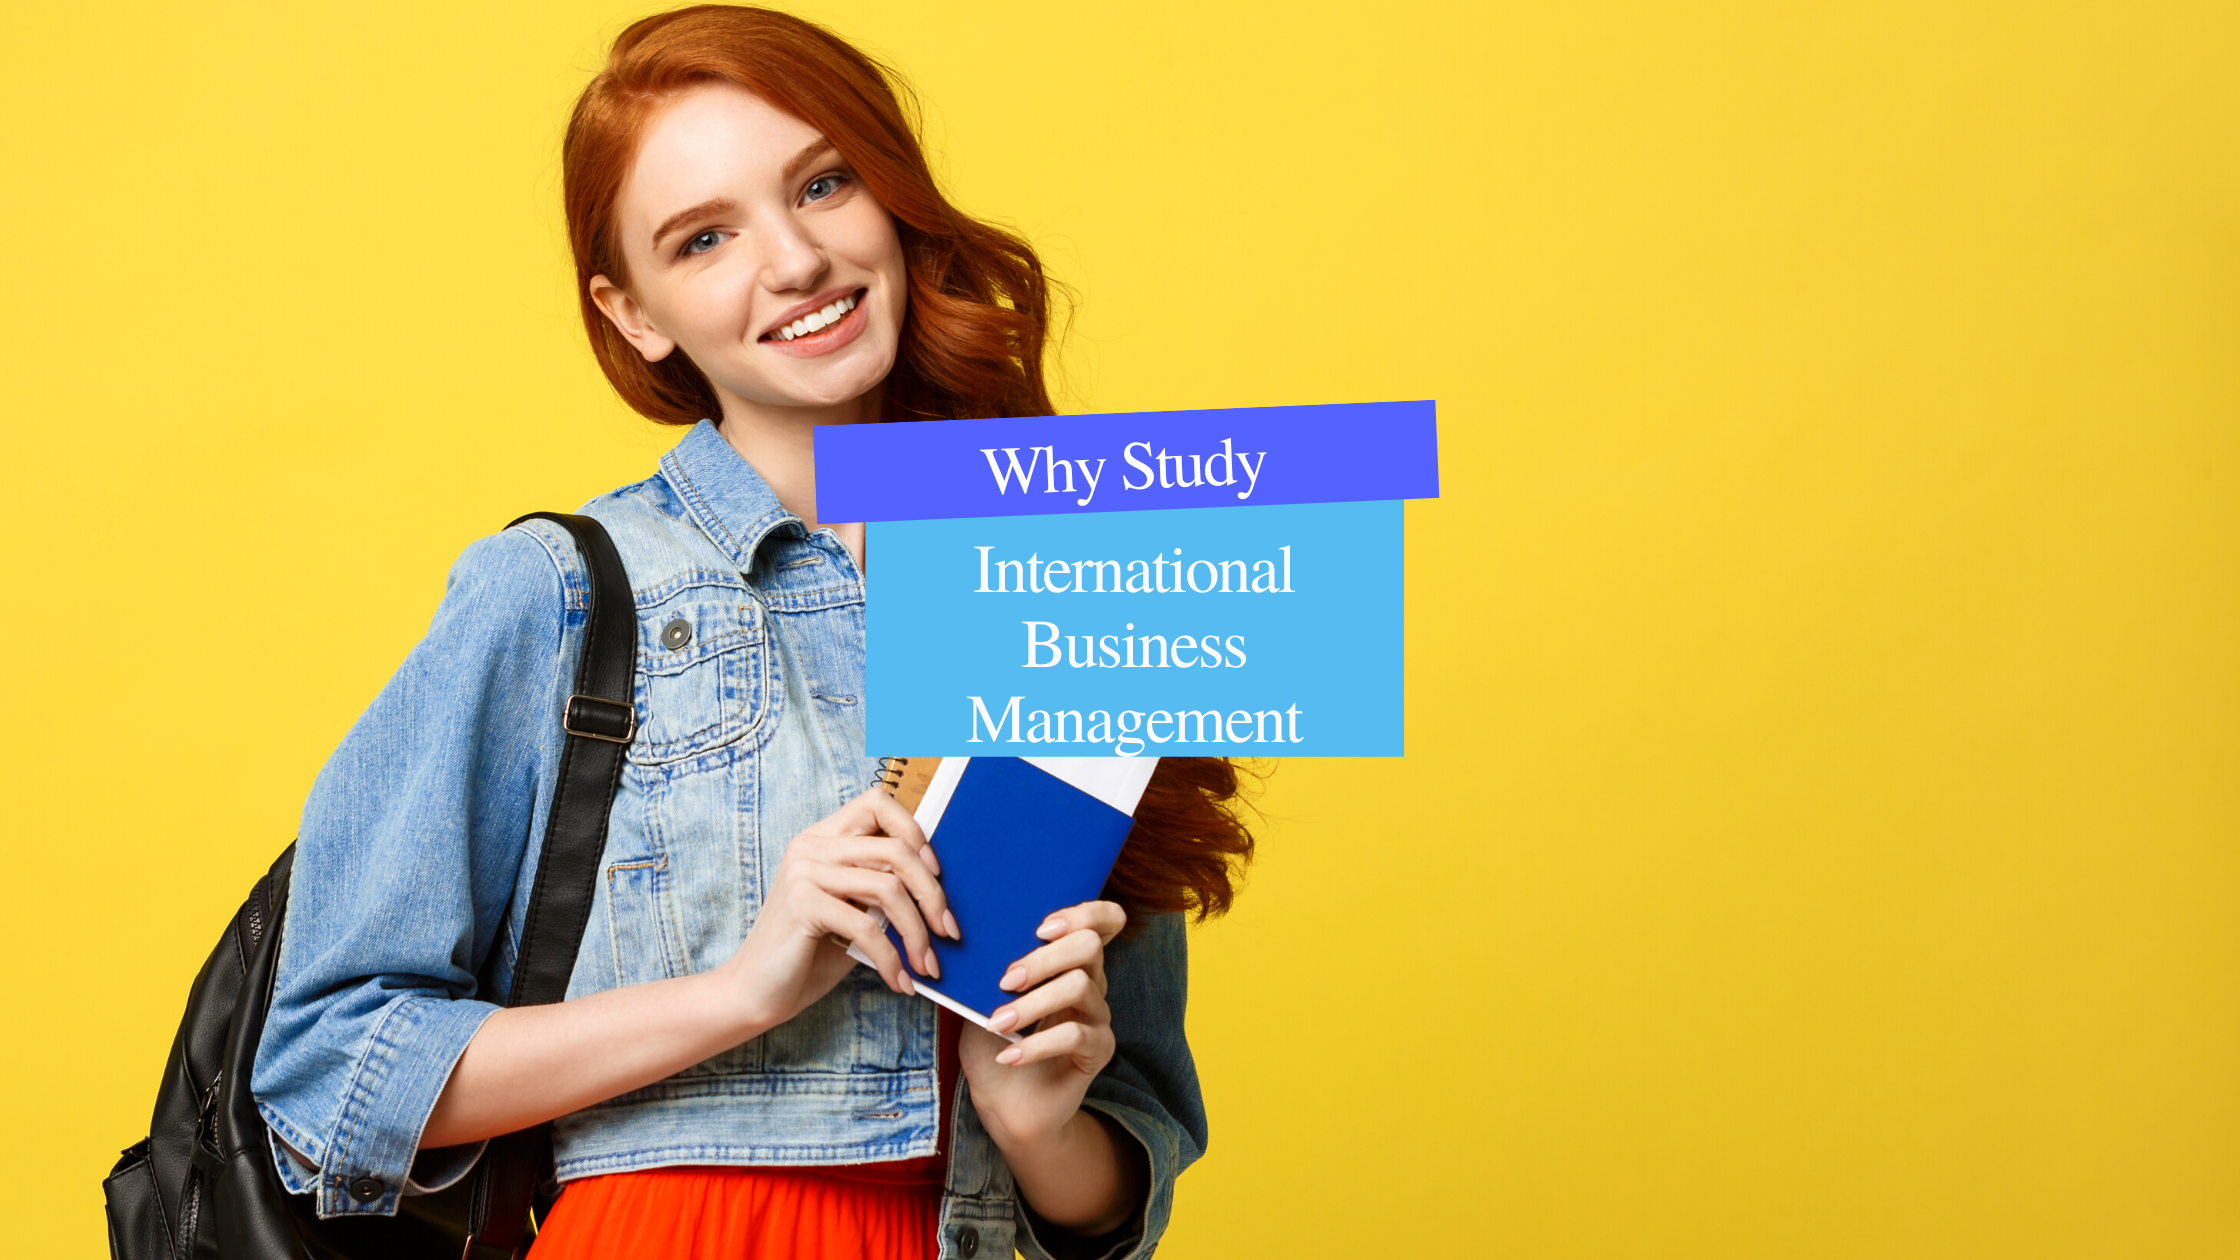 Why Study International Business Management